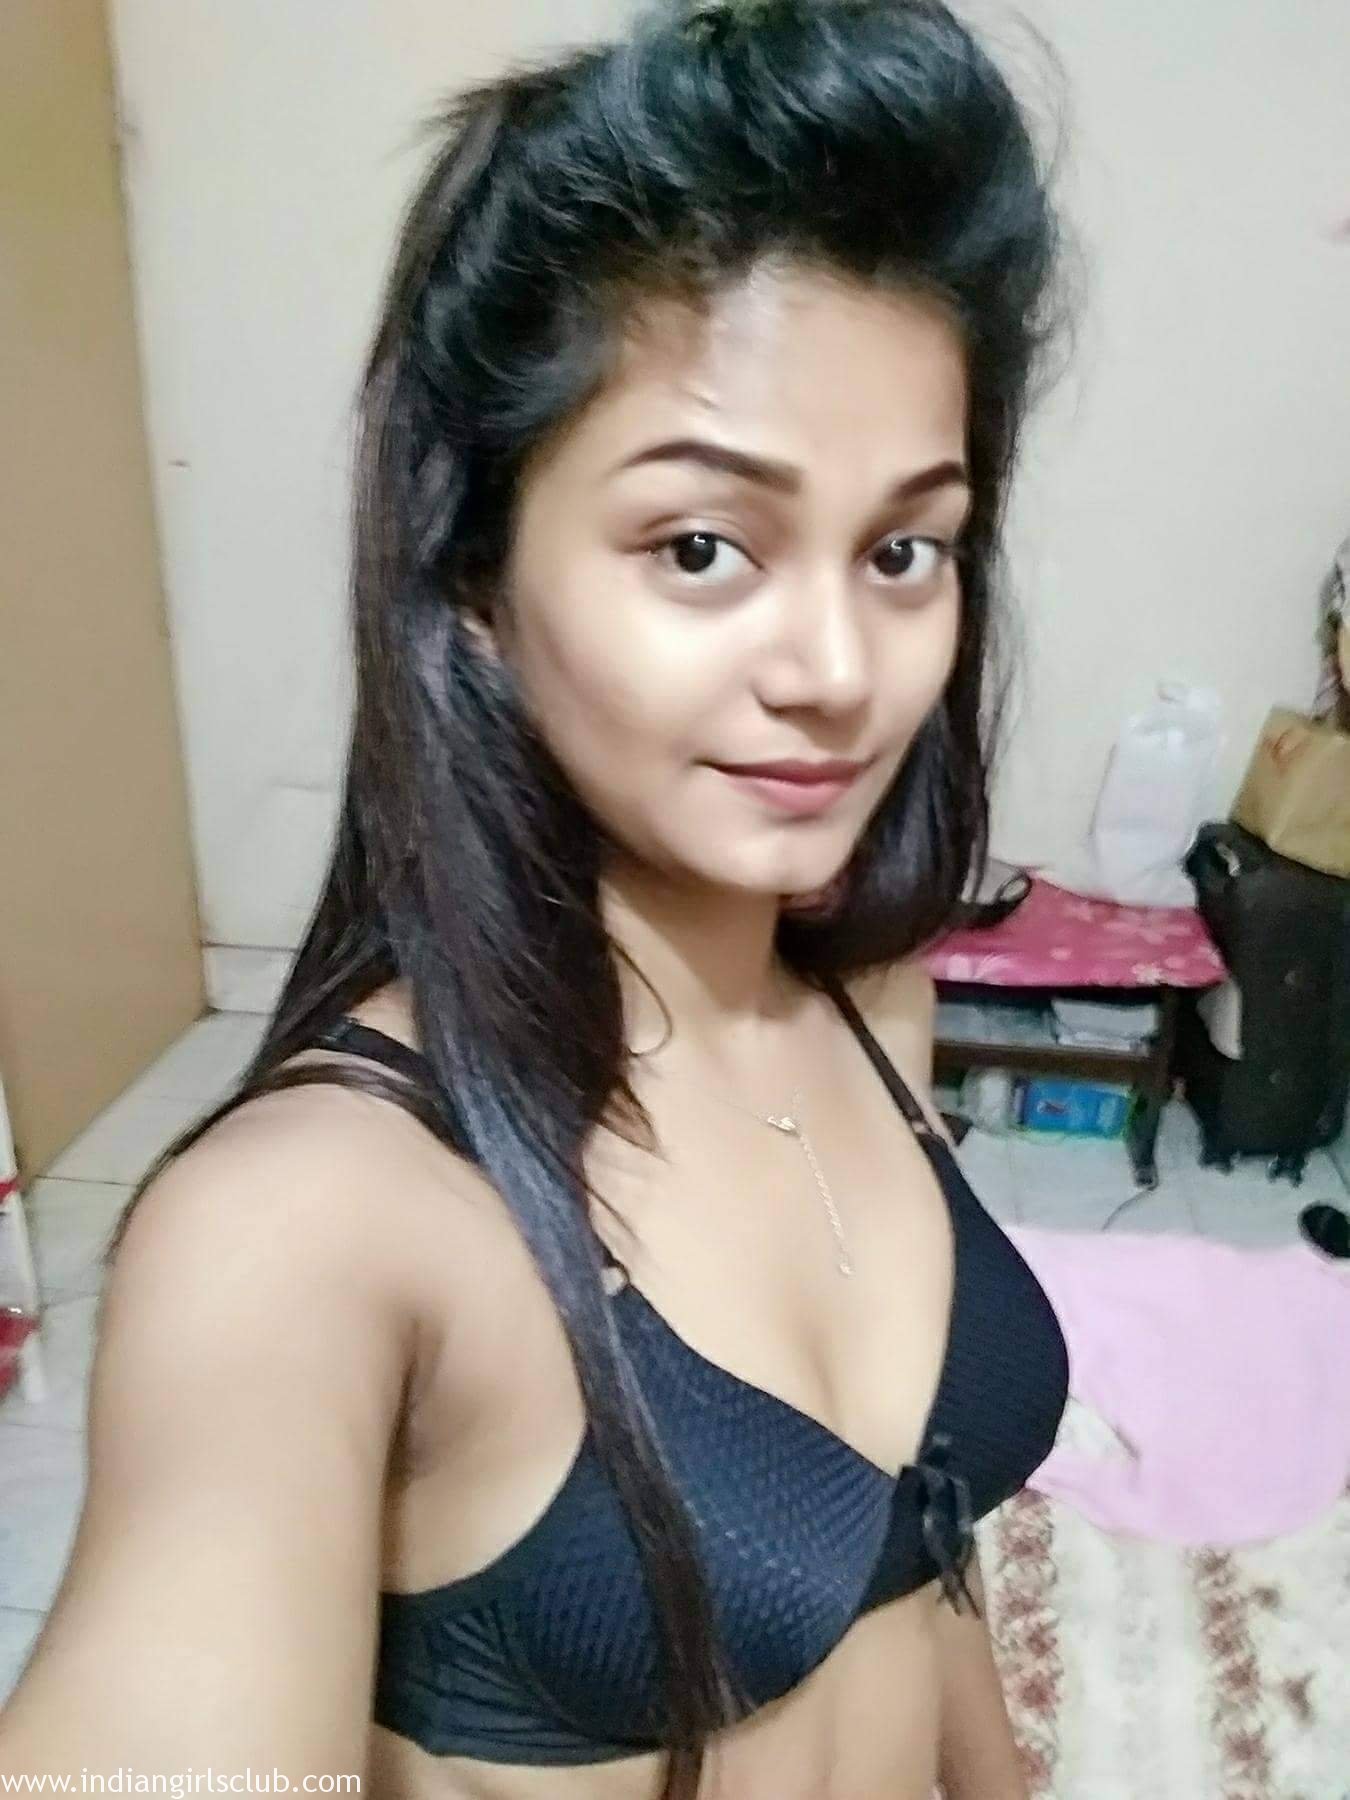 India College Sex - juicy_indian_teen_homemade_porn_7 - Indian Girls Club - Nude Indian Girls &  Hot Sexy Indian Babes